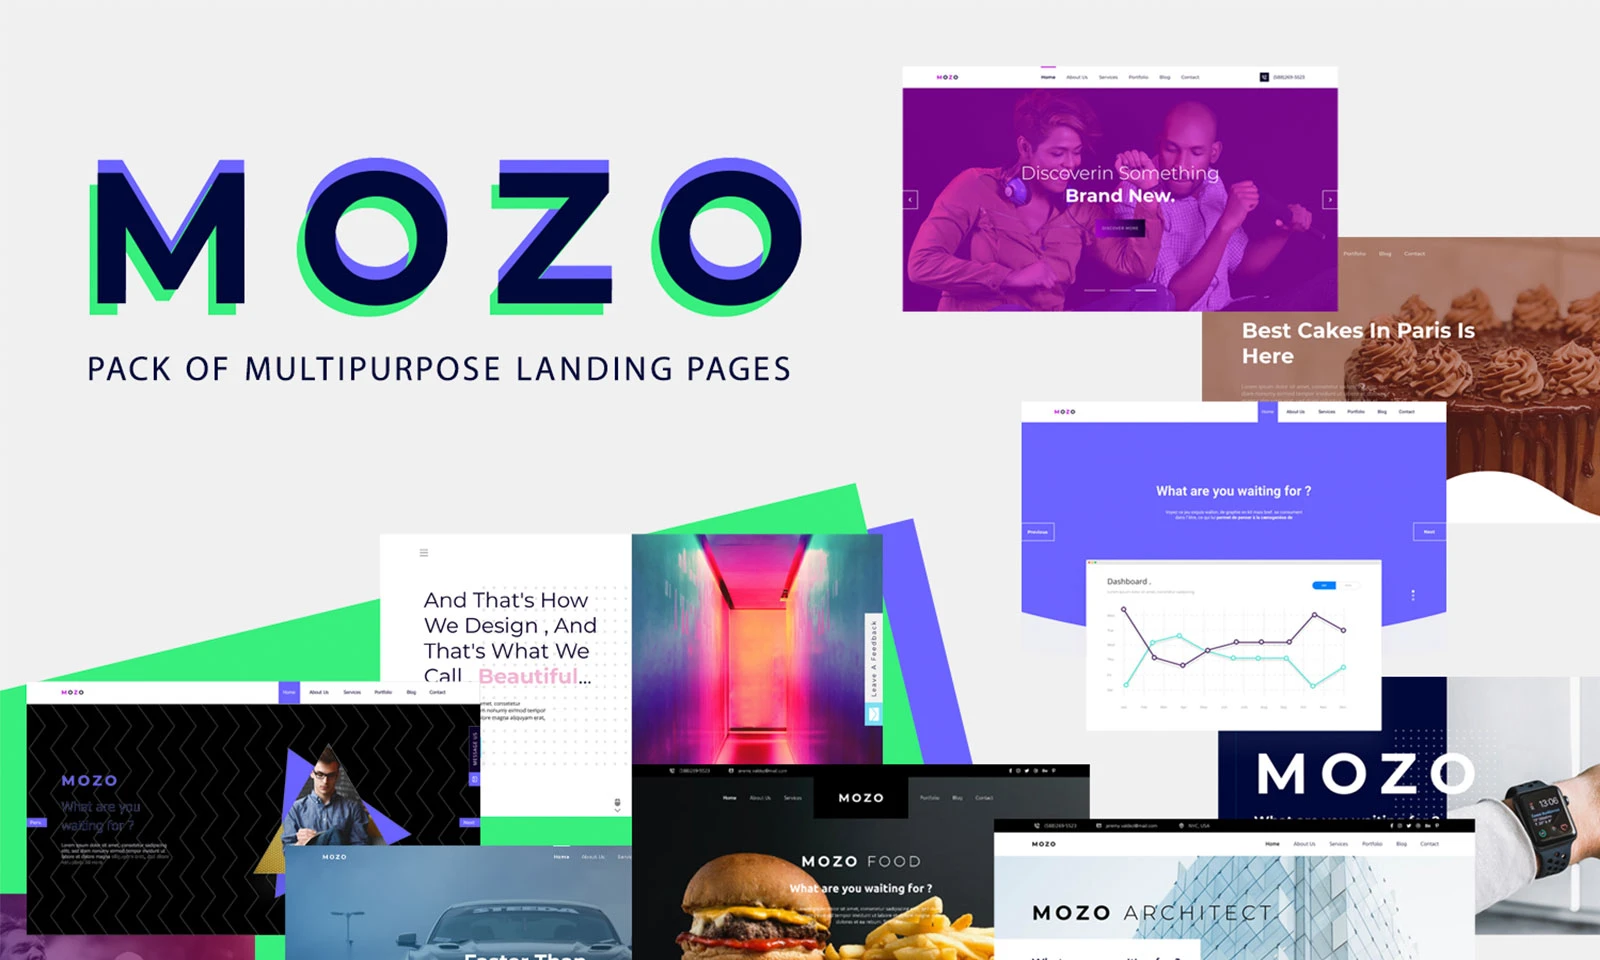 Mozo  A Pack of Multipurpose Landing Pages for Figma and Adobe XD